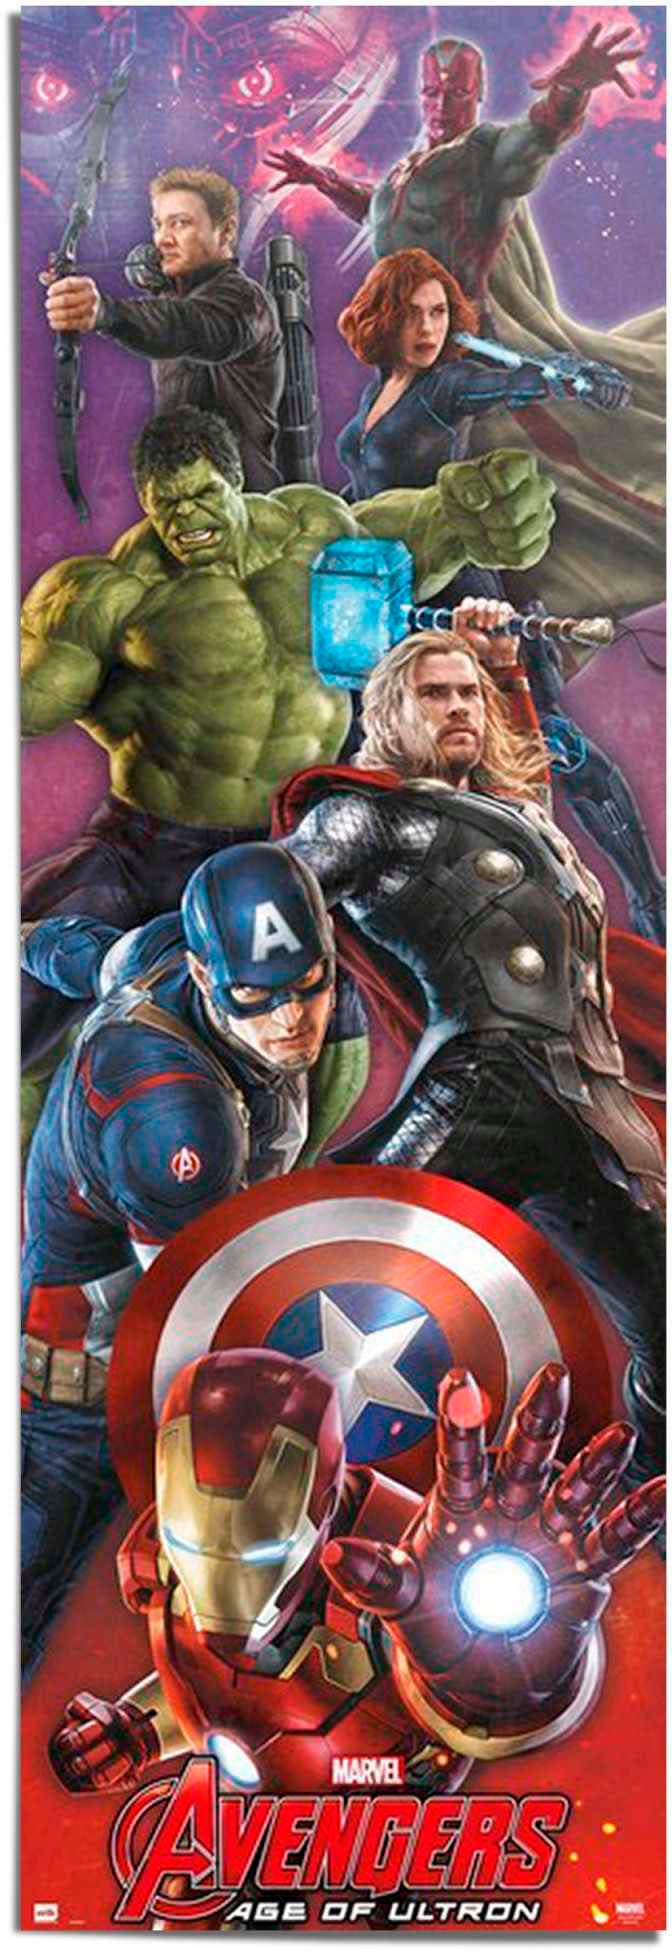 Reinders! Poster »Marvel Avengers - age of ultron« von Reinders!